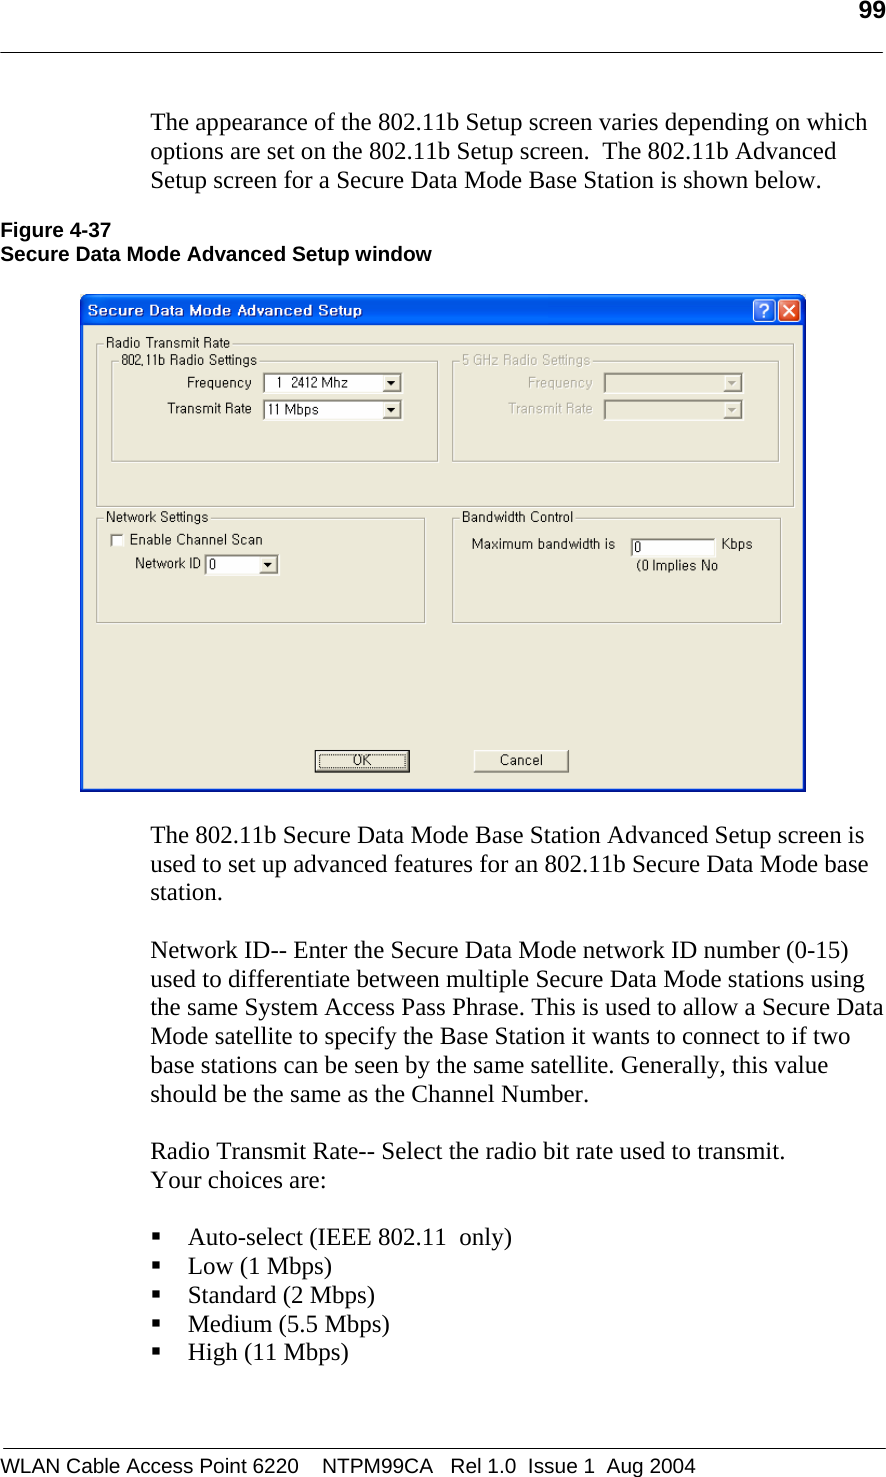   99  The appearance of the 802.11b Setup screen varies depending on which options are set on the 802.11b Setup screen.  The 802.11b Advanced Setup screen for a Secure Data Mode Base Station is shown below.  Figure 4-37 Secure Data Mode Advanced Setup window    The 802.11b Secure Data Mode Base Station Advanced Setup screen is used to set up advanced features for an 802.11b Secure Data Mode base station.    Network ID-- Enter the Secure Data Mode network ID number (0-15) used to differentiate between multiple Secure Data Mode stations using the same System Access Pass Phrase. This is used to allow a Secure Data Mode satellite to specify the Base Station it wants to connect to if two base stations can be seen by the same satellite. Generally, this value should be the same as the Channel Number.  Radio Transmit Rate-- Select the radio bit rate used to transmit.  Your choices are:   Auto-select (IEEE 802.11  only)  Low (1 Mbps)  Standard (2 Mbps)  Medium (5.5 Mbps)  High (11 Mbps)  WLAN Cable Access Point 6220    NTPM99CA   Rel 1.0  Issue 1  Aug 2004 